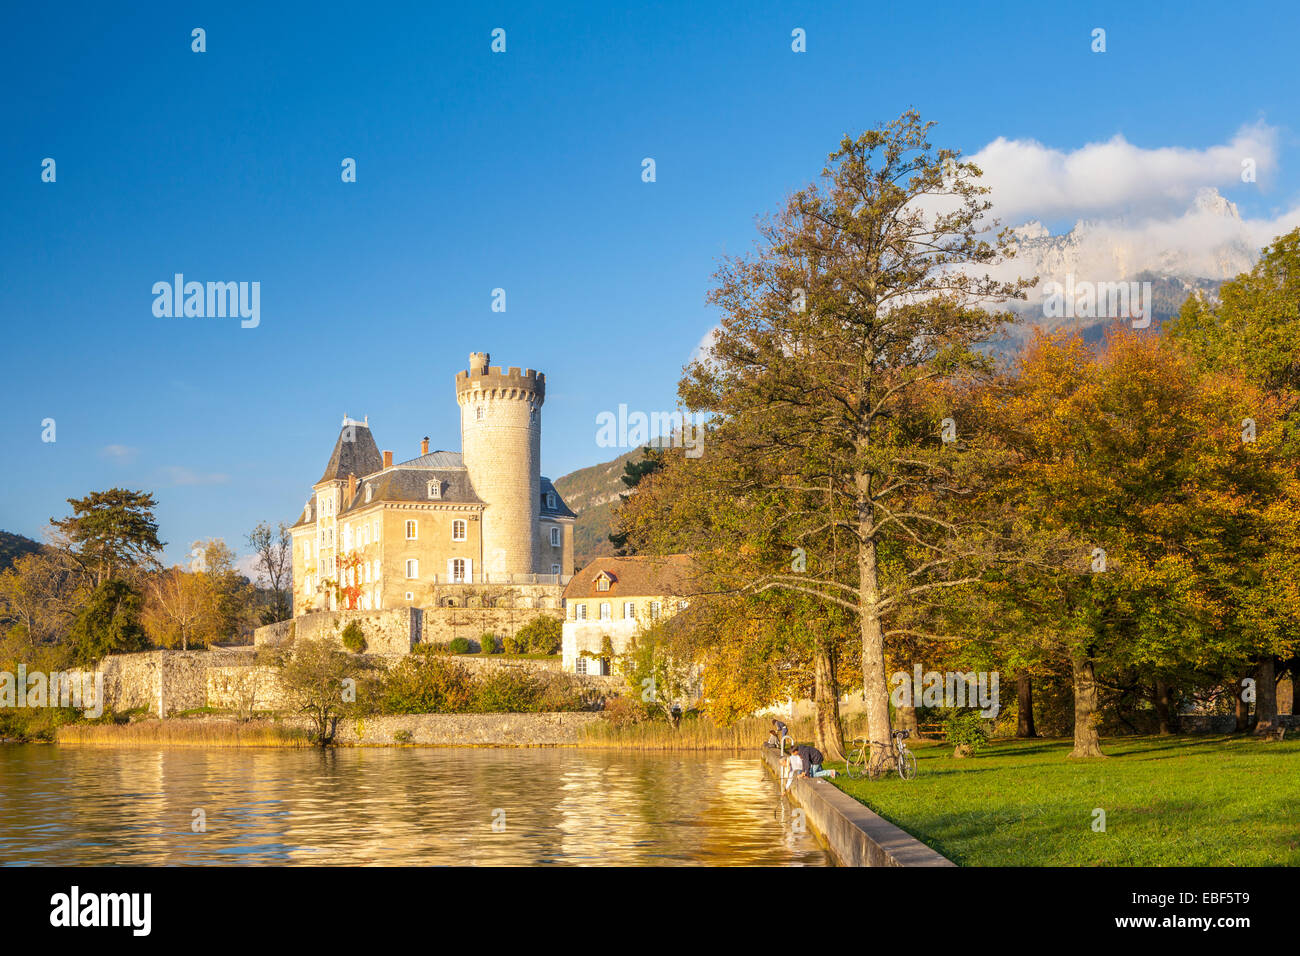 Château Ruphy in Dungt village in Annecy lake, Haute-Savoie, Rhône-Alpes, France Stock Photo